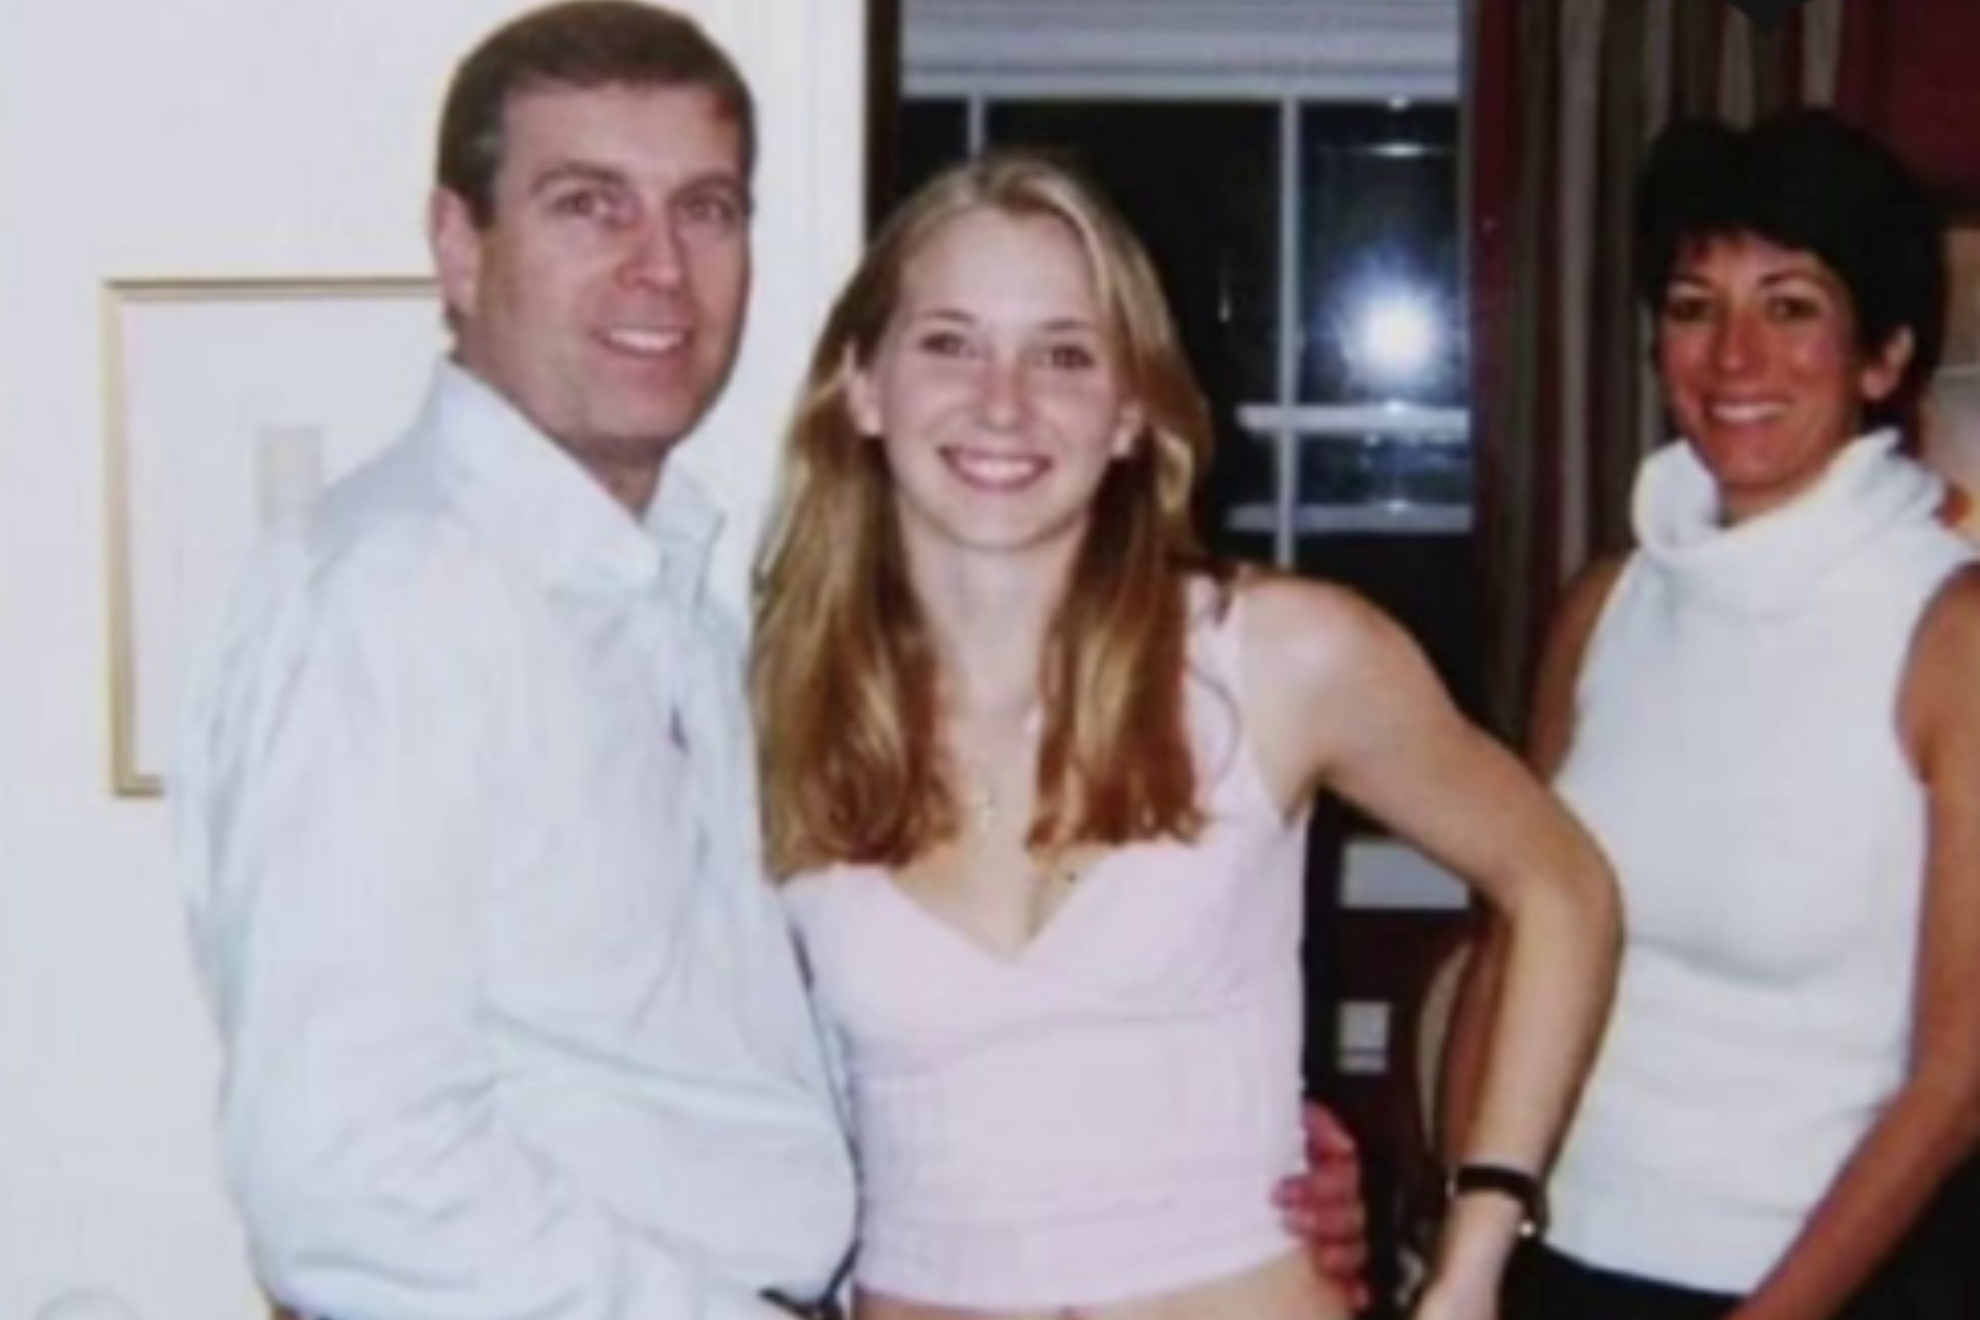 Prince Andrew named in accusation of underage orgy on Epstein Island